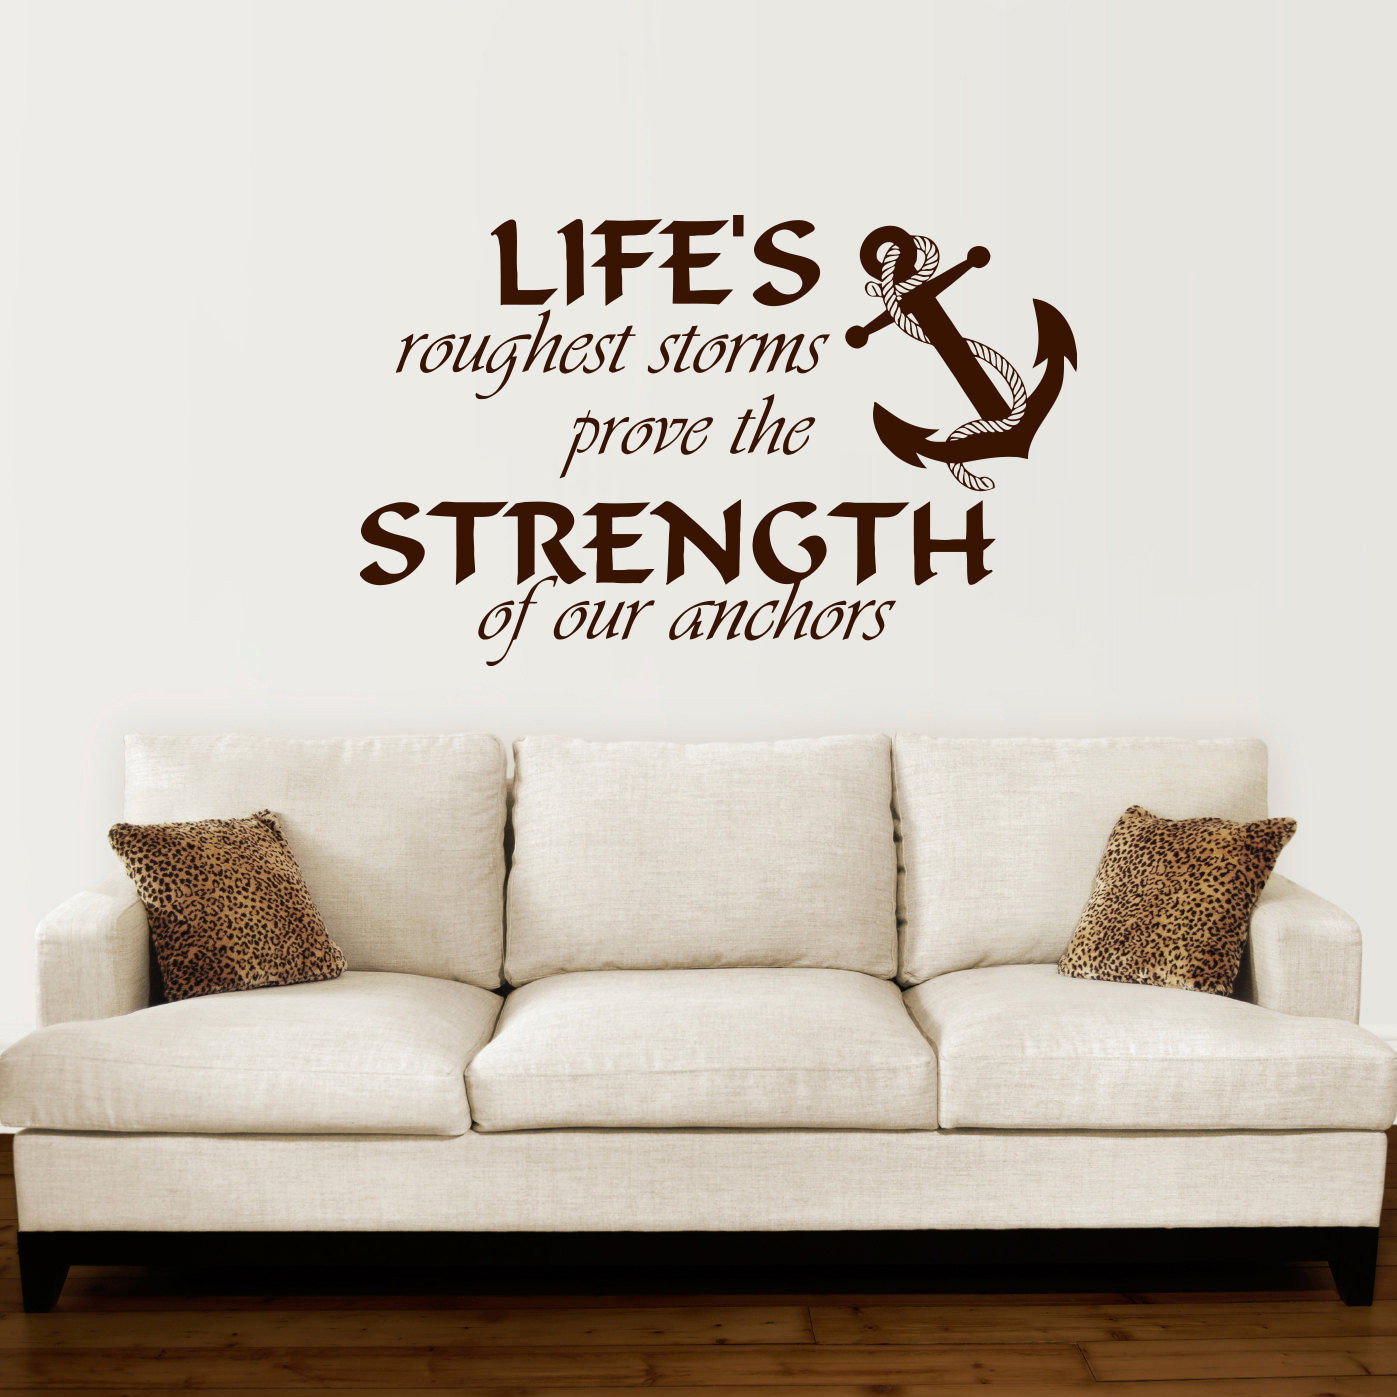 Wall Decals Quotes For Bedroom
 Anchor Wall Decal Quotes Nautical Sayings Wall Vinyl